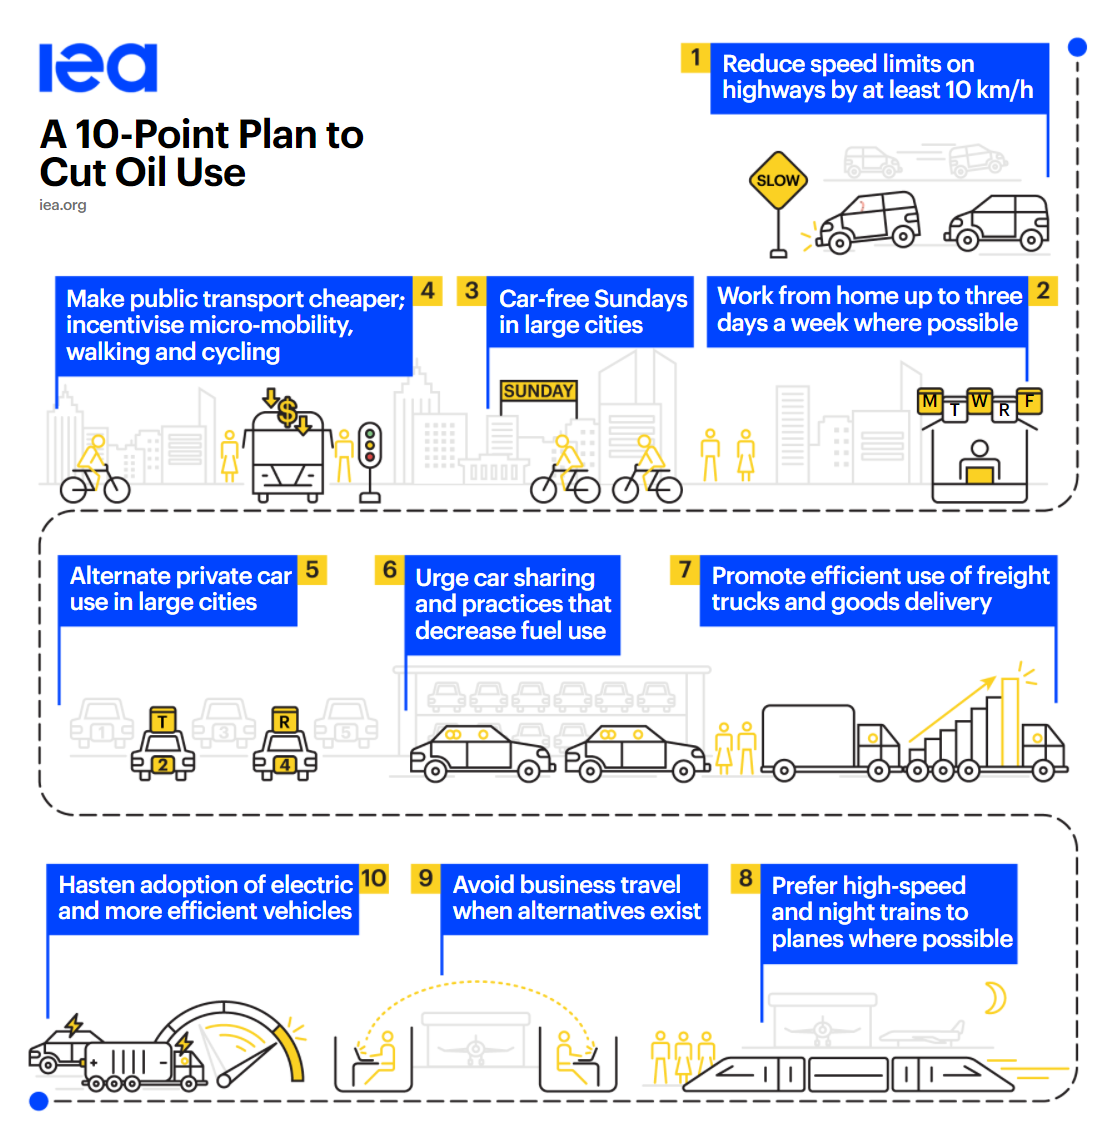 A 10-point plan to cut oil use, infographic by the IEA